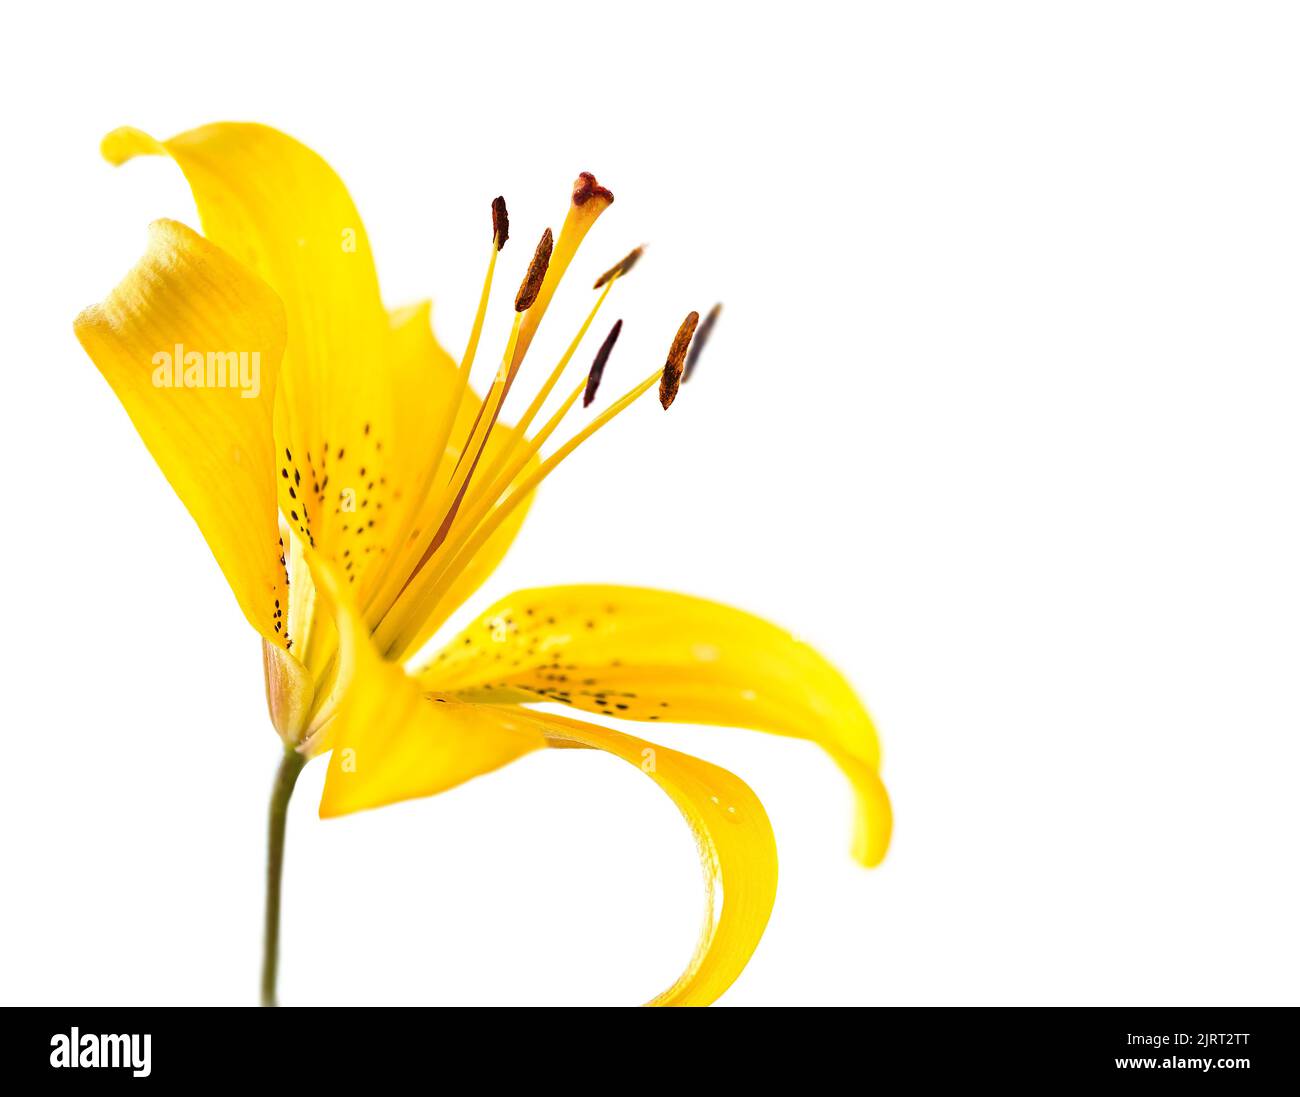 Yellow Lily flower close-up on white background. Stock Photo